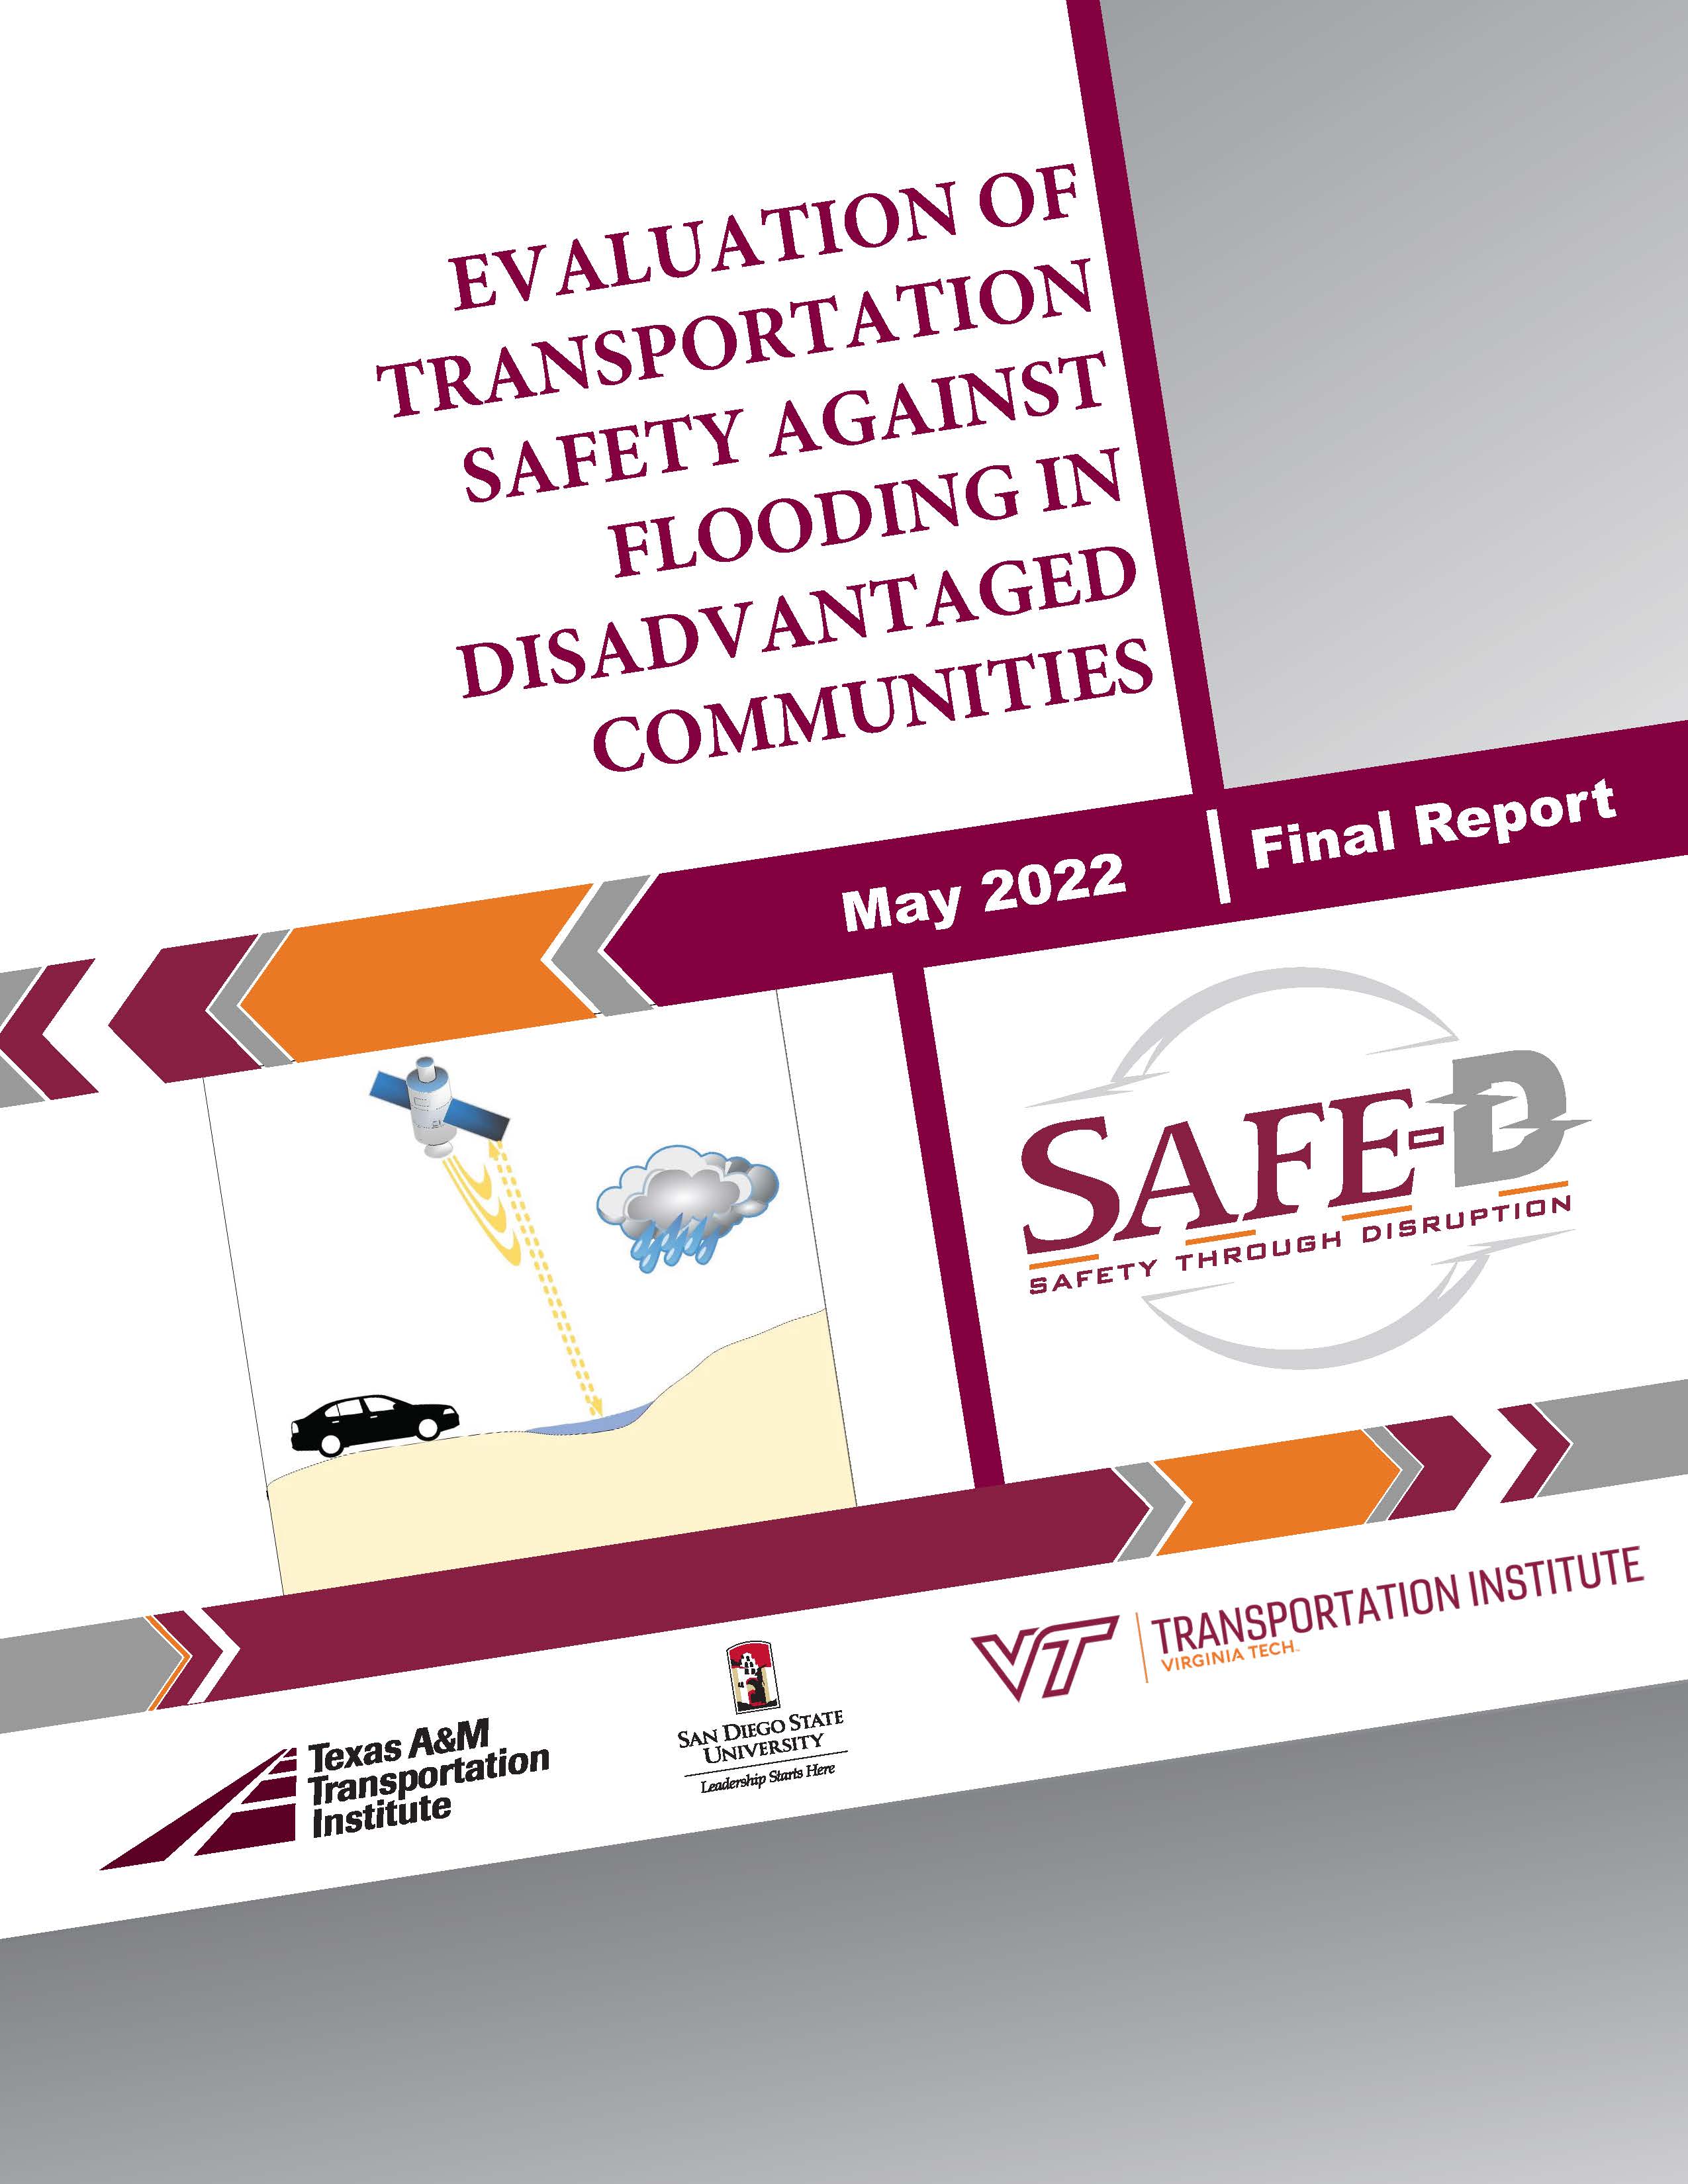 05-101 Evaluation of transportation safety against flooding in disadvantaged communities